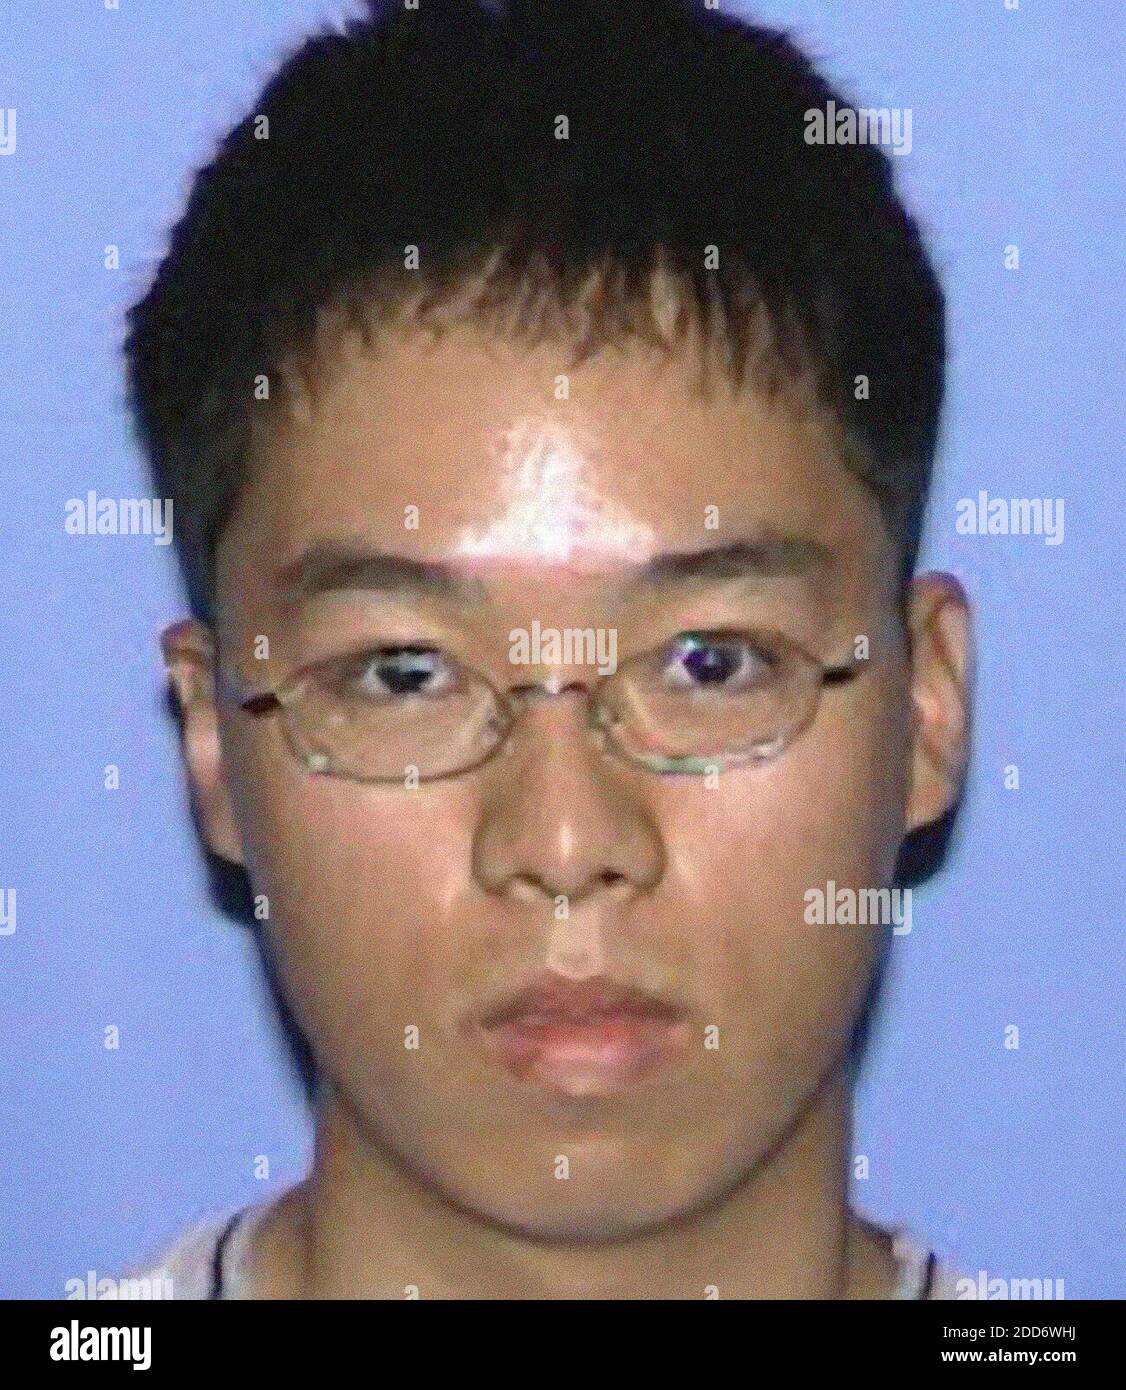 NO FILM, NO VIDEO, NO TV, NO DOCUMENTARY - Cho Seung-Hui, shown in this photo from Virginia Tech University and the Virginia State Police, is the suspected gunman in the Virginia Tech shooting rampage on April 16, 2007. Police said Cho killed 30 people in a Virginia Tech engineering building Monday morning and then killed himself. The photo shows Cho as a junior at the Chantilly, Virginia high school. Photo by Virginia State Police/Virginia Tech University/MCT/ABACAPRESS.COM Stock Photo